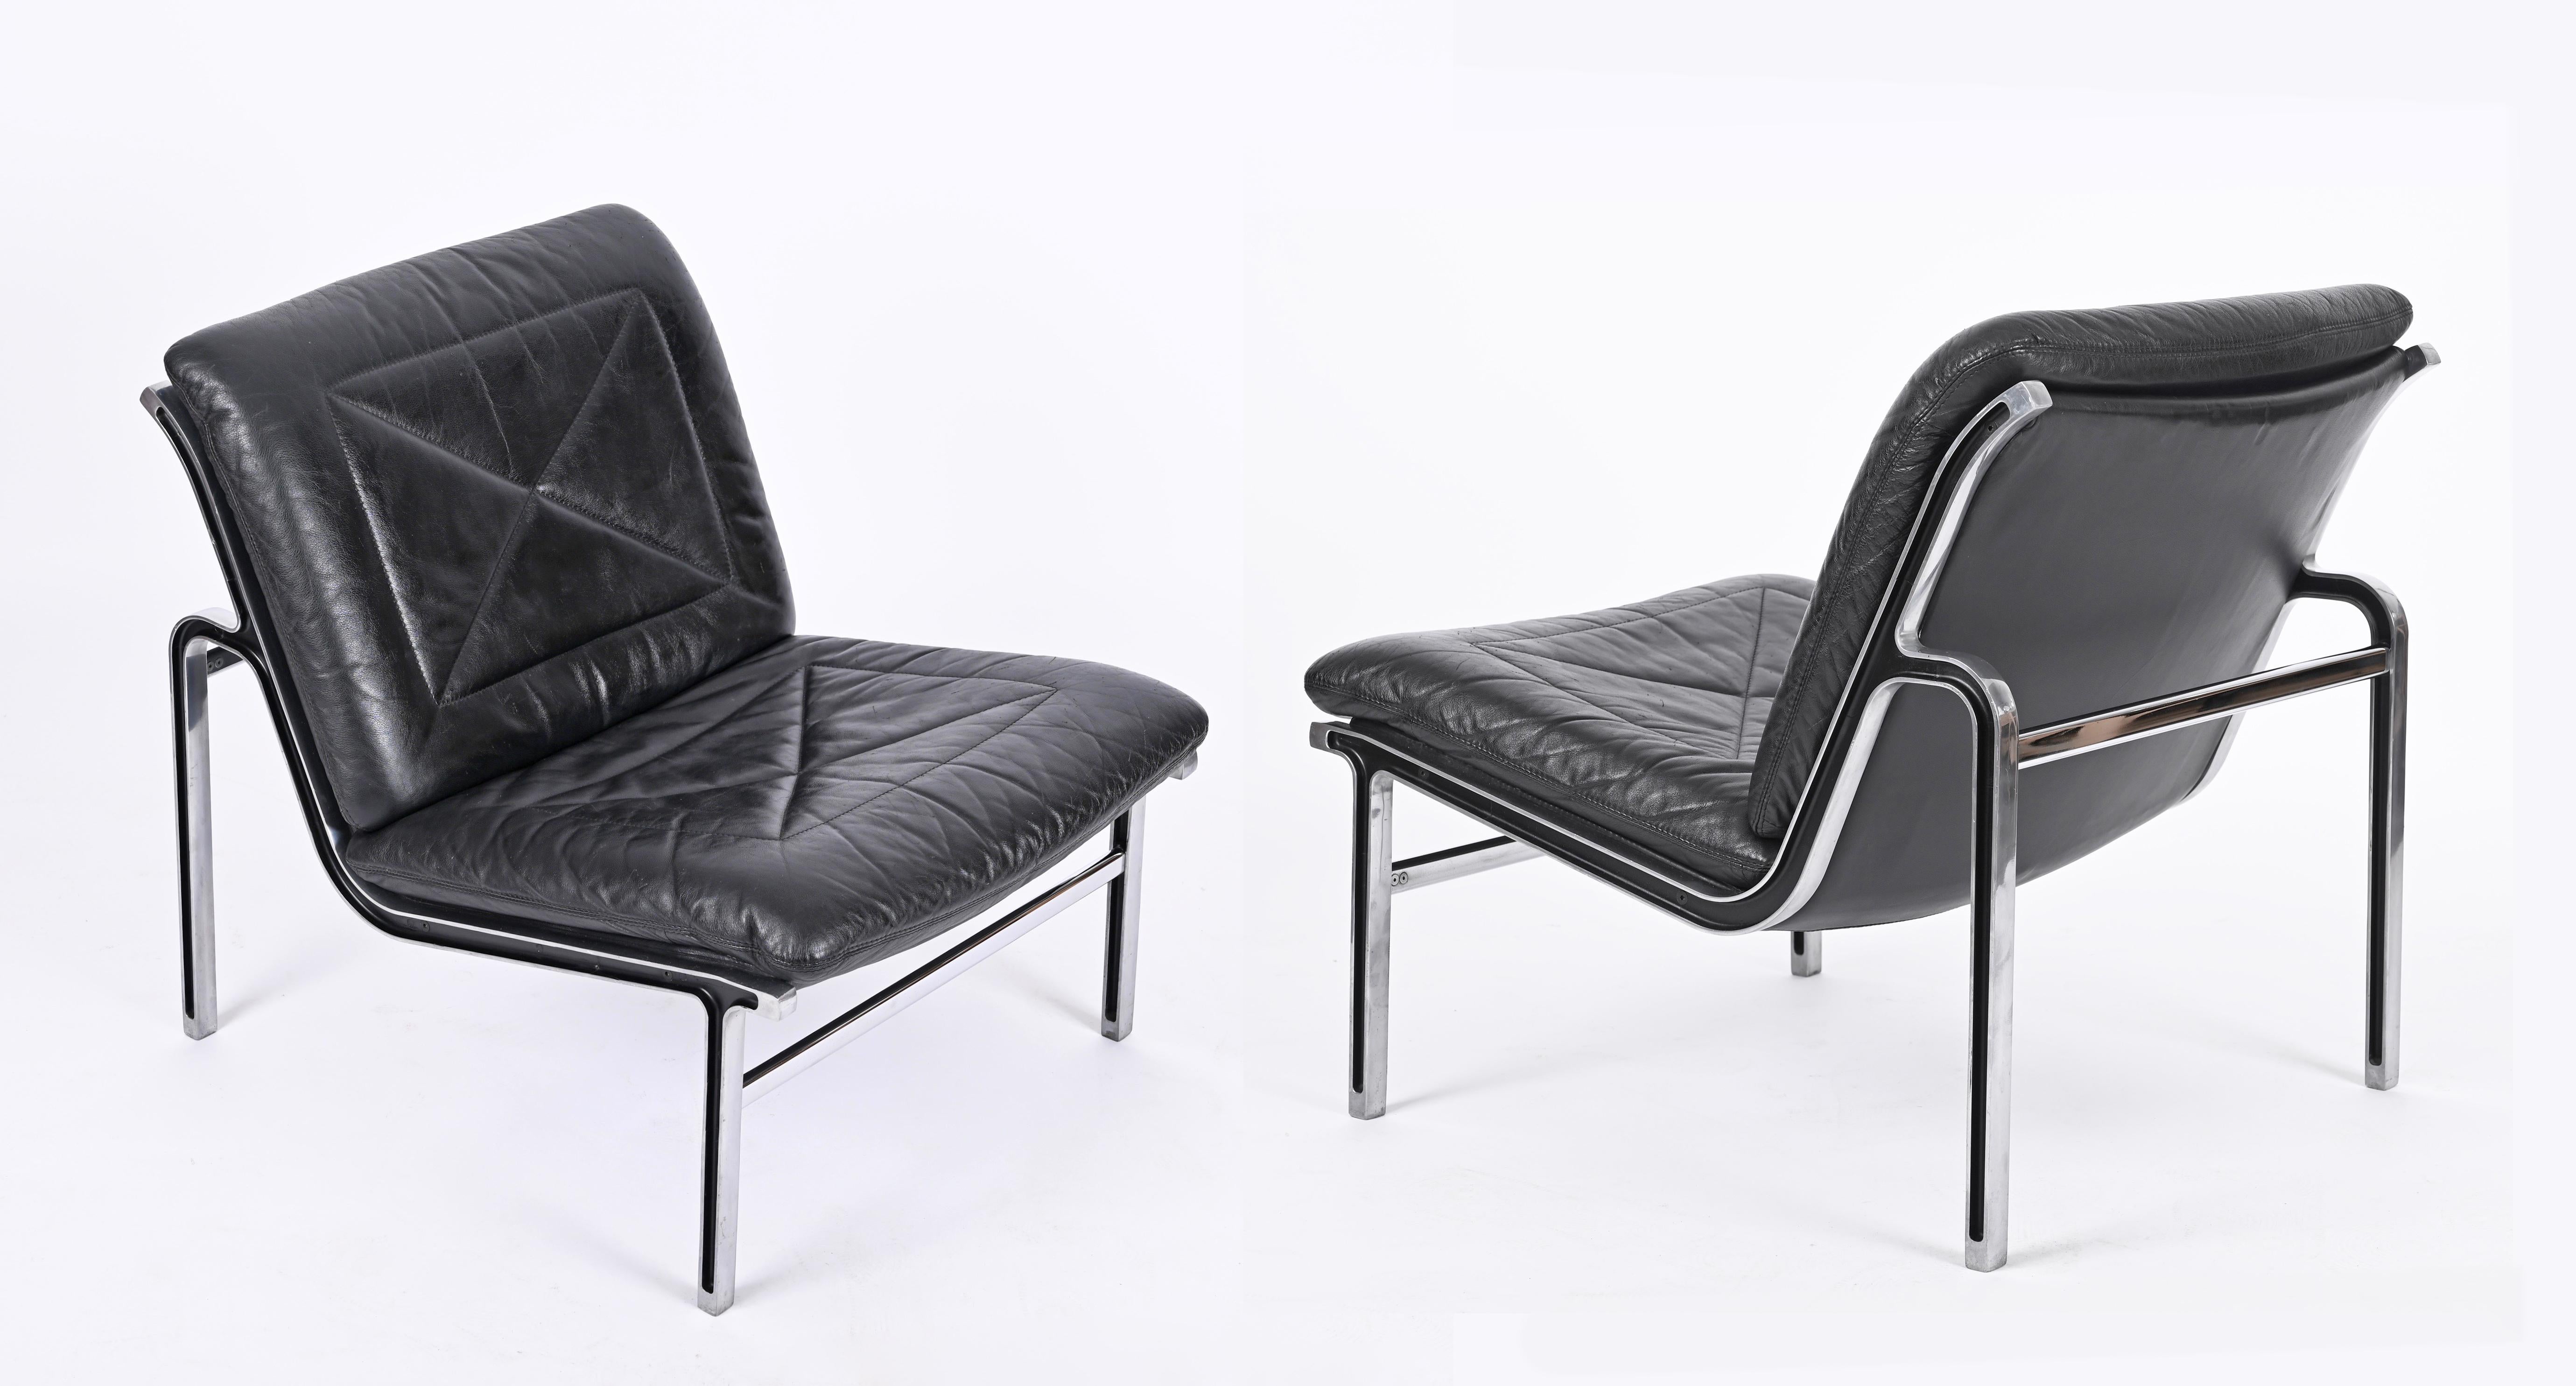 Andre Vandenbeuck Pair of 'Aluline' Lounge Chairs in Black Leather, Swiss, 1960s For Sale 6